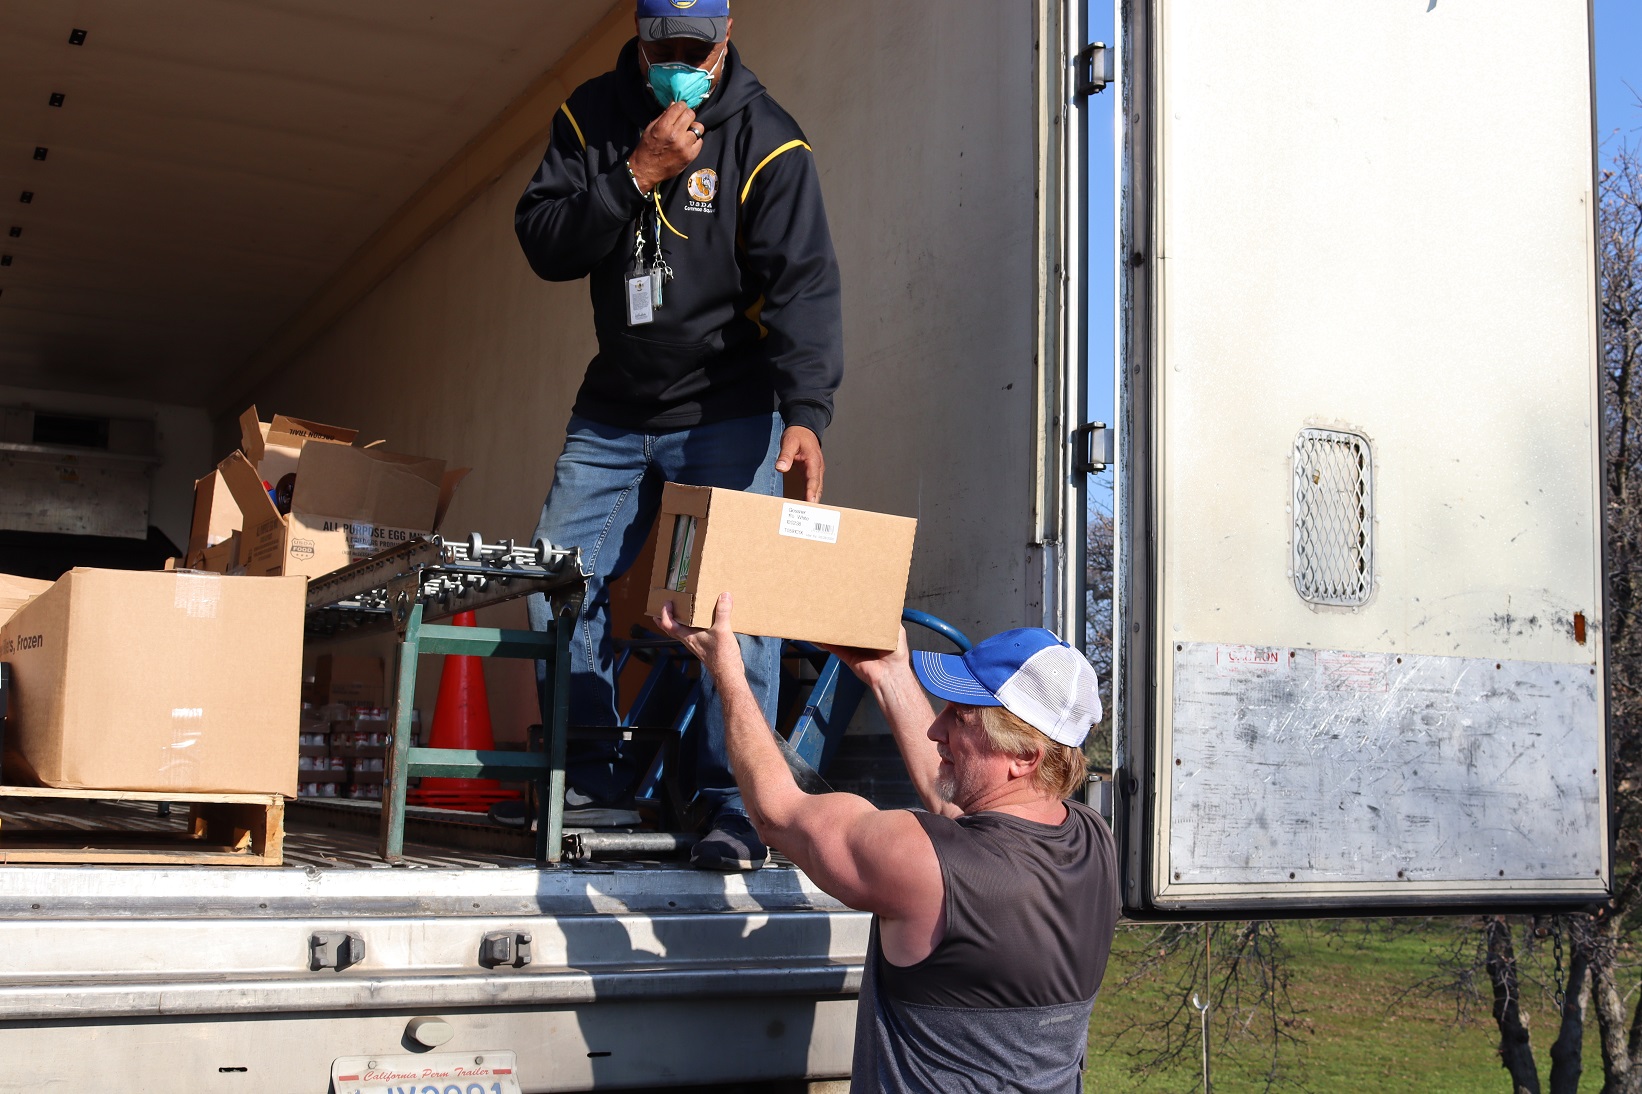 California Valley Miwok Tribe's staff unloading goods during a USDA Food Distribution.